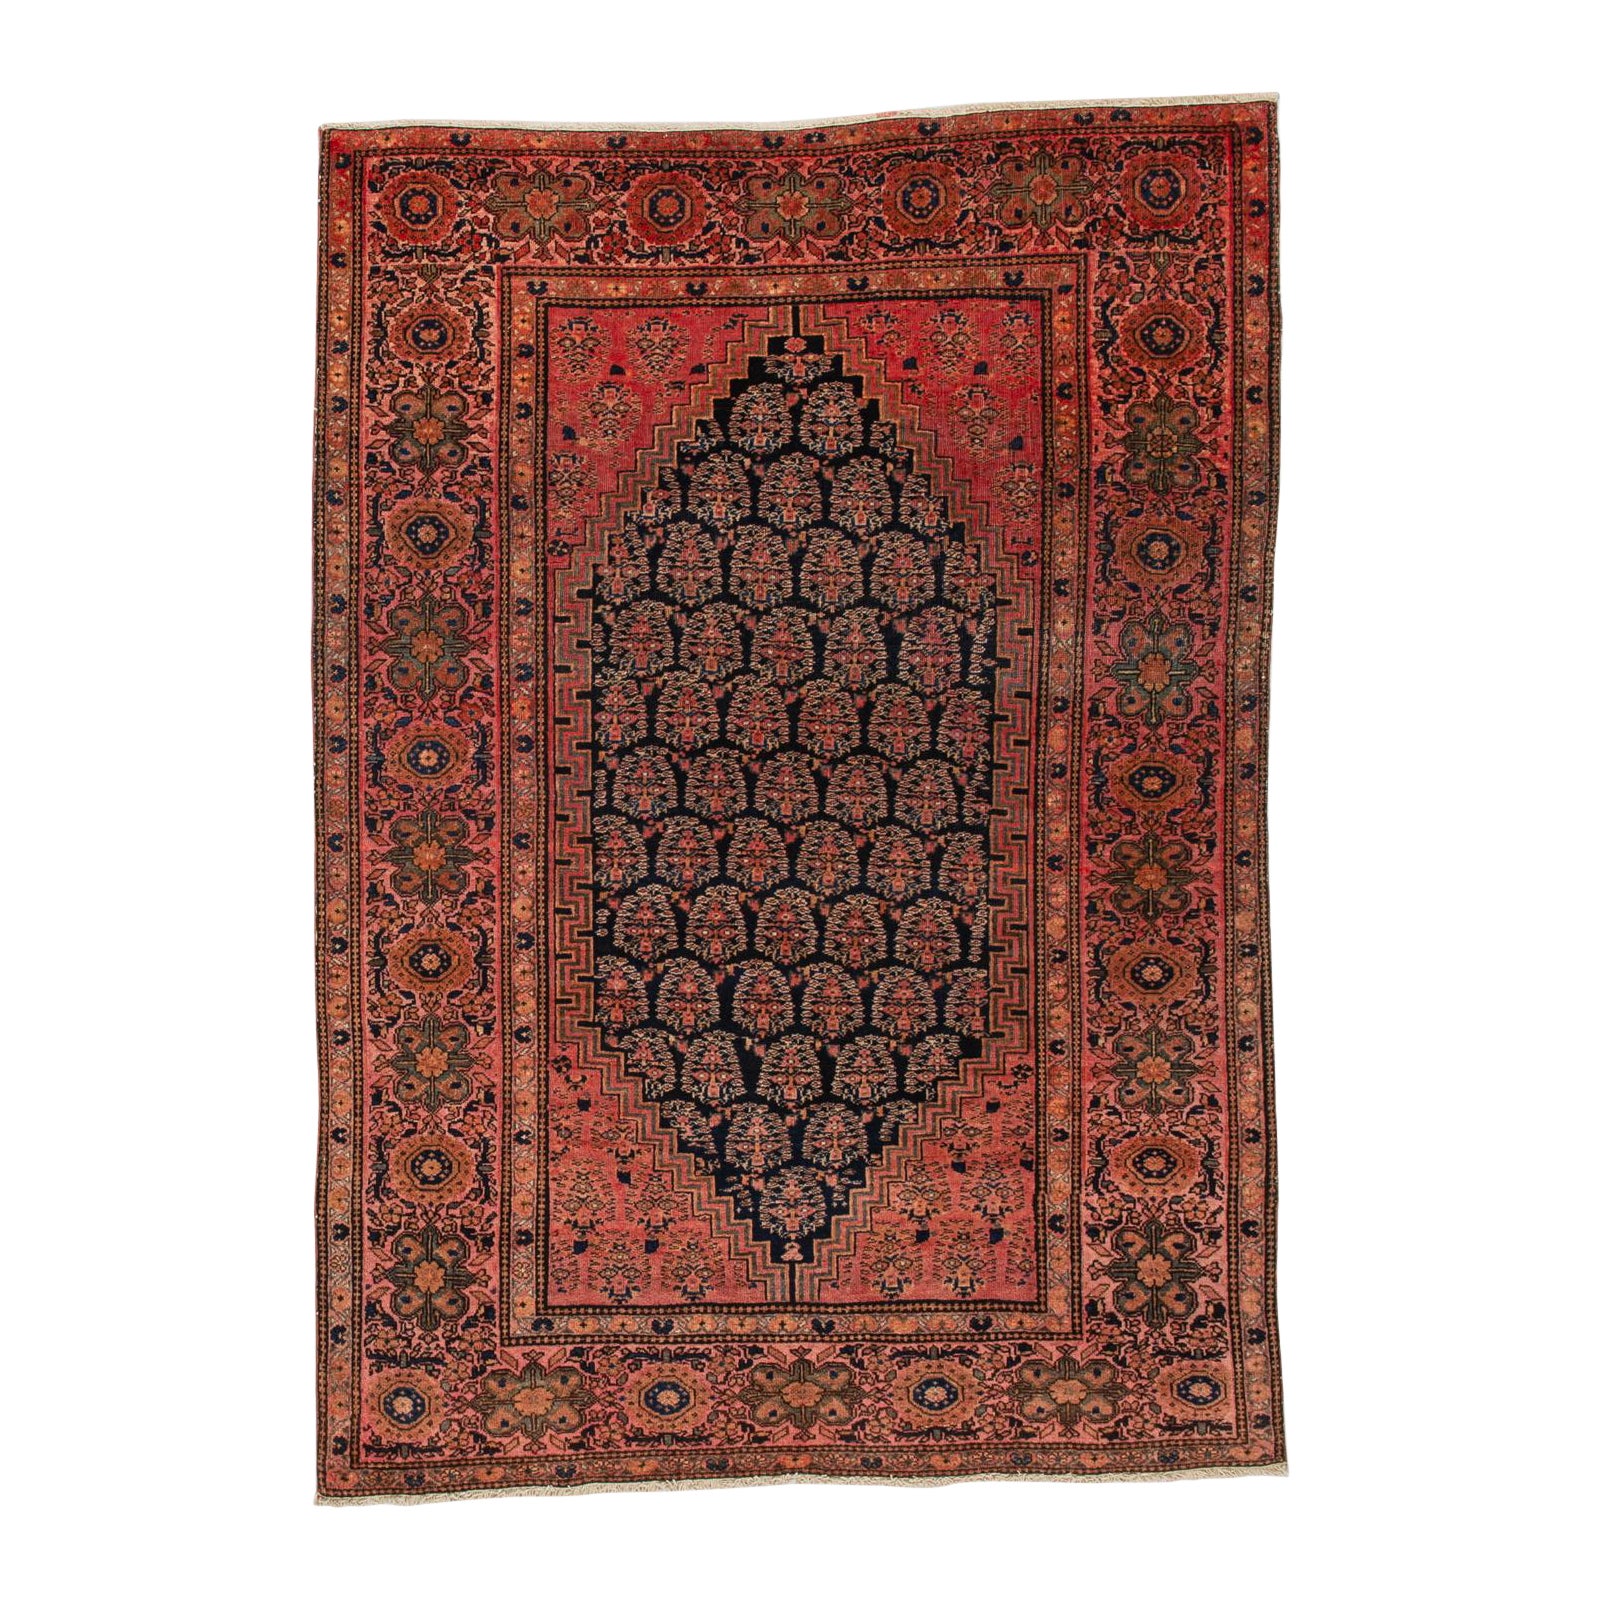 Rare Oriental Carpet from Central Asia